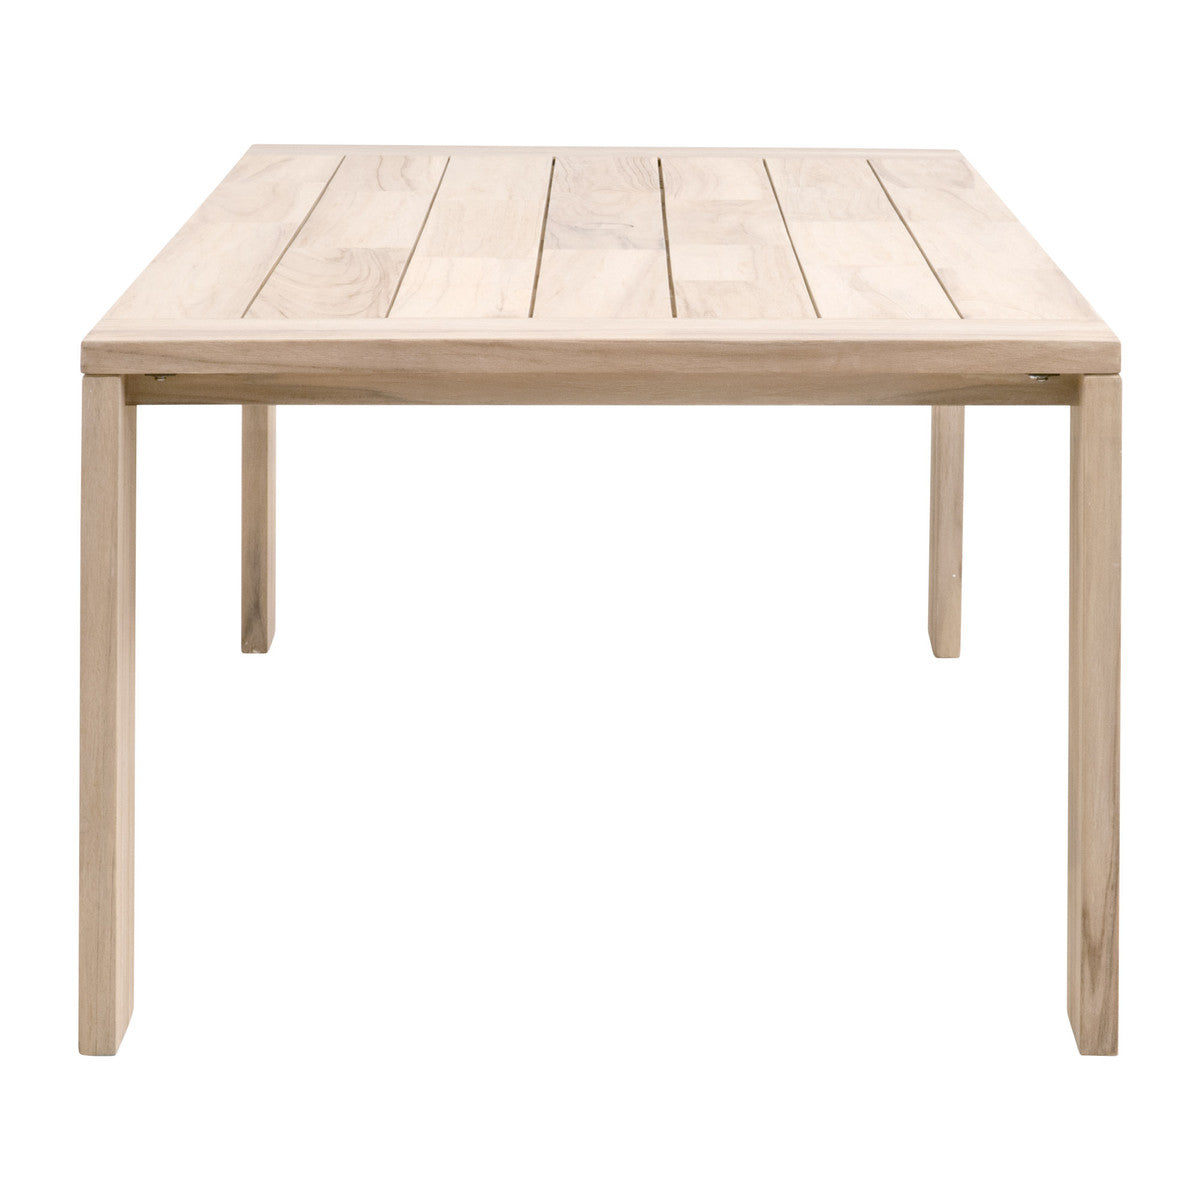 Bend Outdoor Dining Table